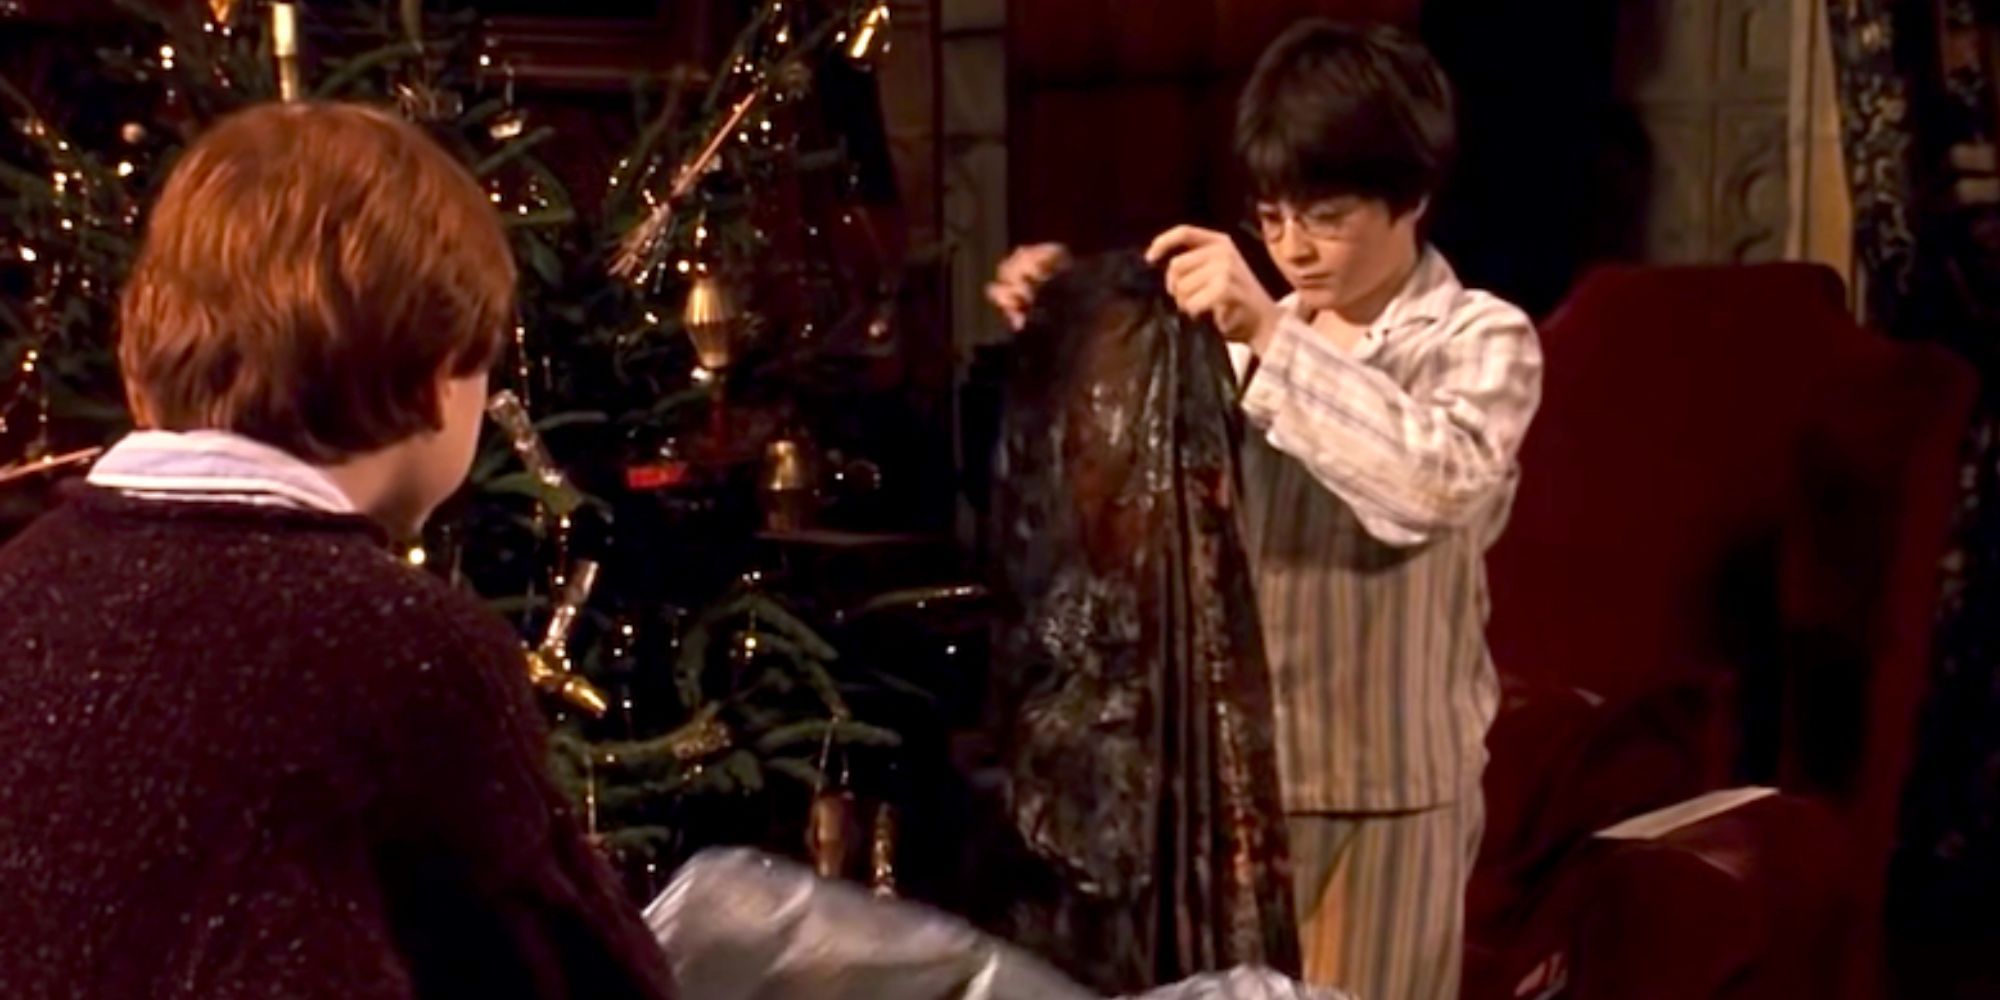 Why Dumbledore Gave Harry Potter The Invisibility Cloak In The Sorcerer's Stone